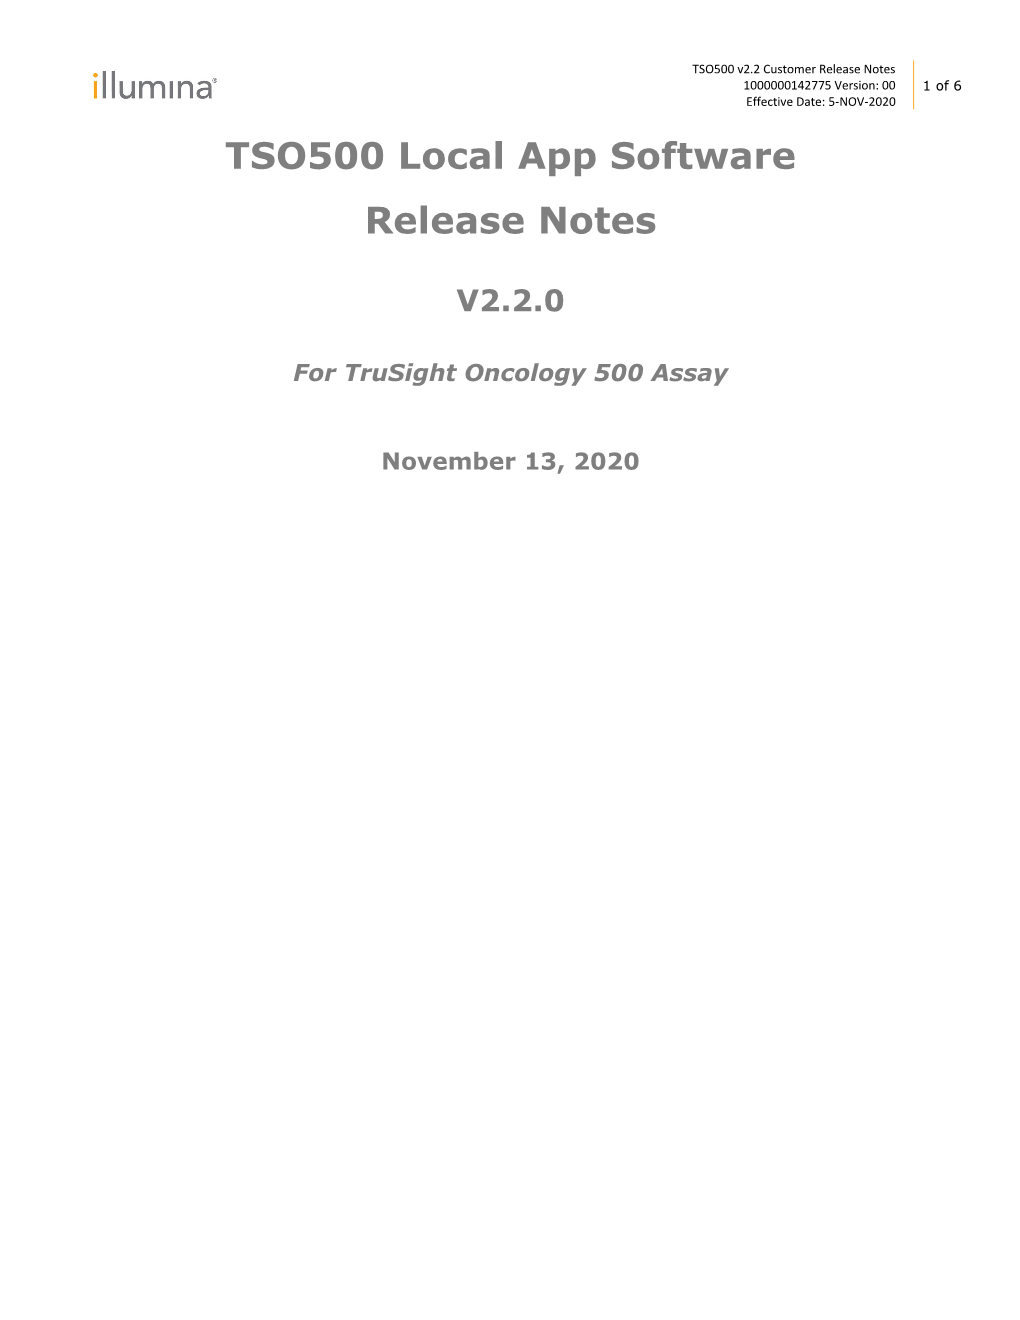 TSO500 Local App Software Release Notes